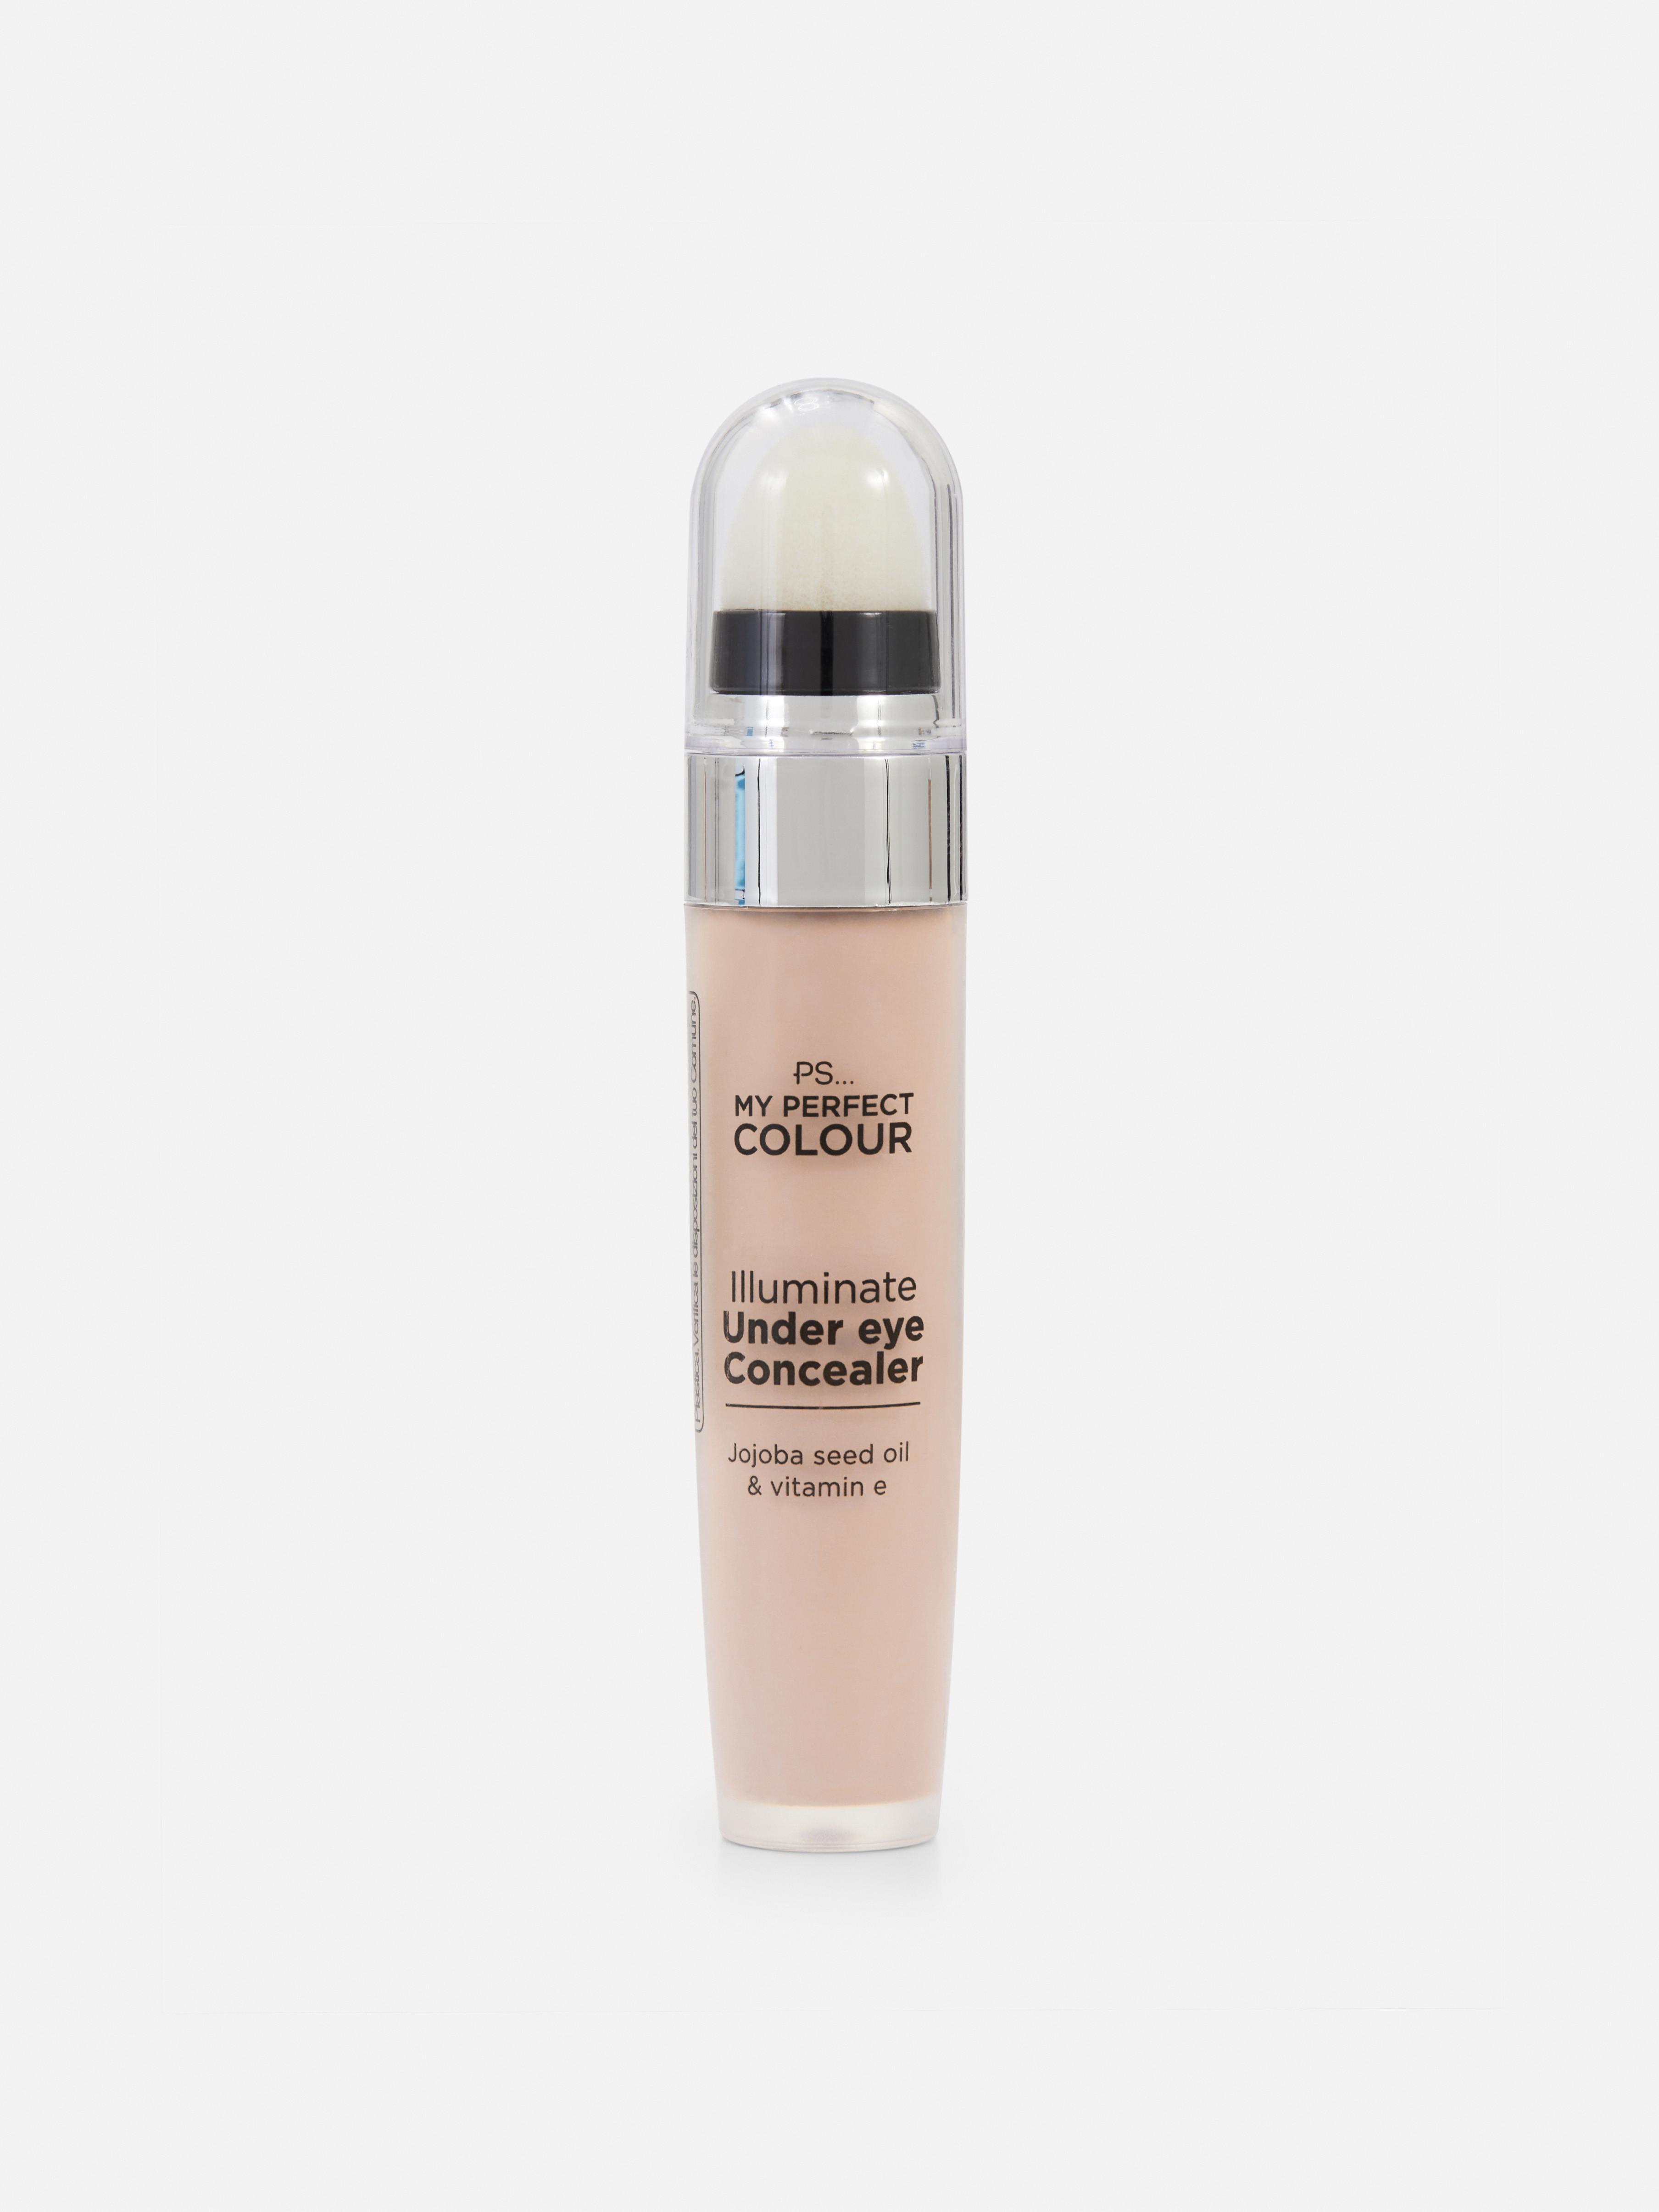 PS... My Perfect Colour Concealer